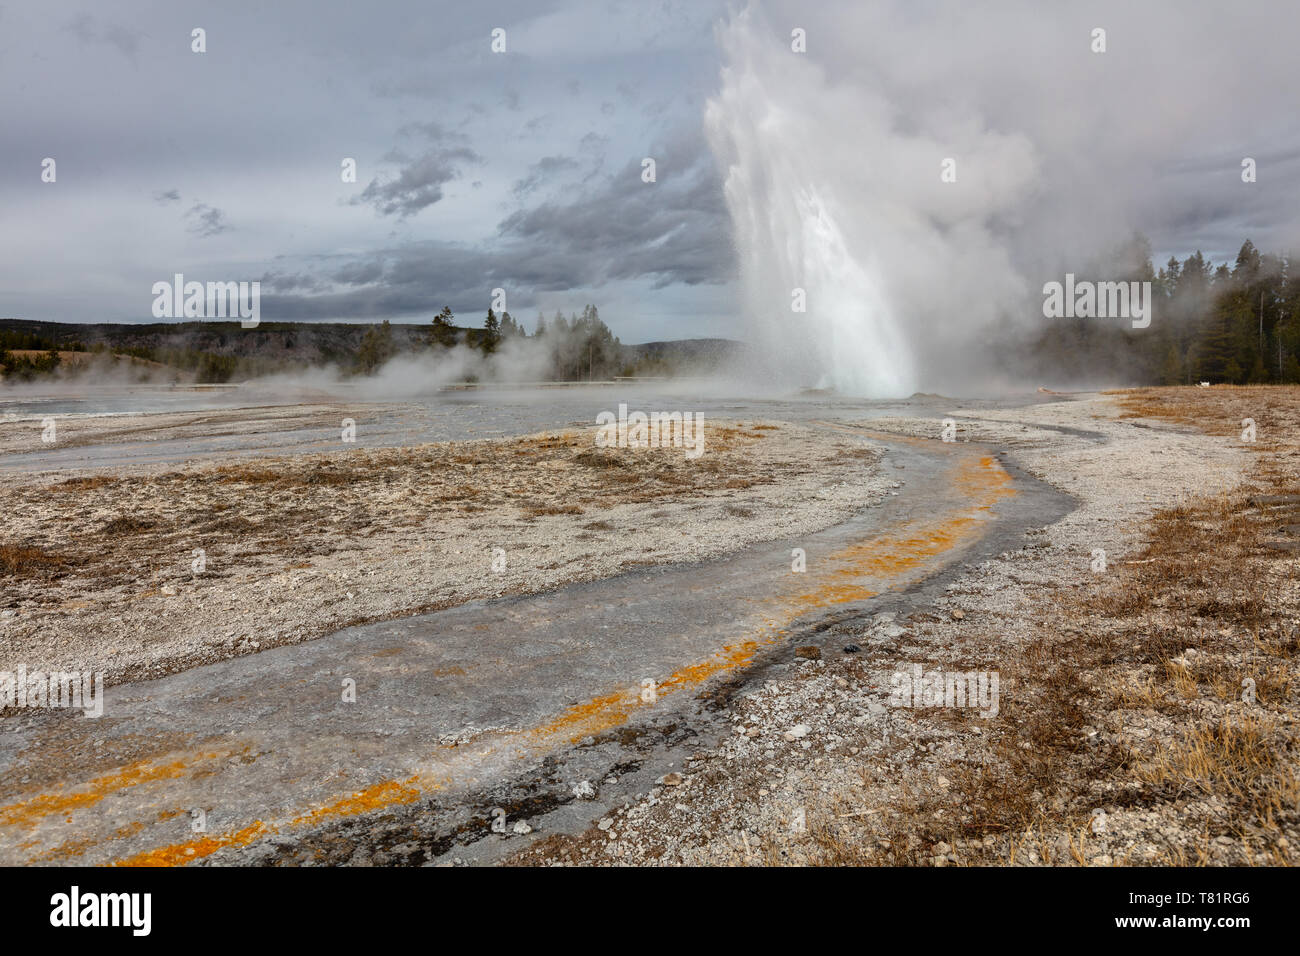 Yellowstone Geyser, Daisy Banque D'Images